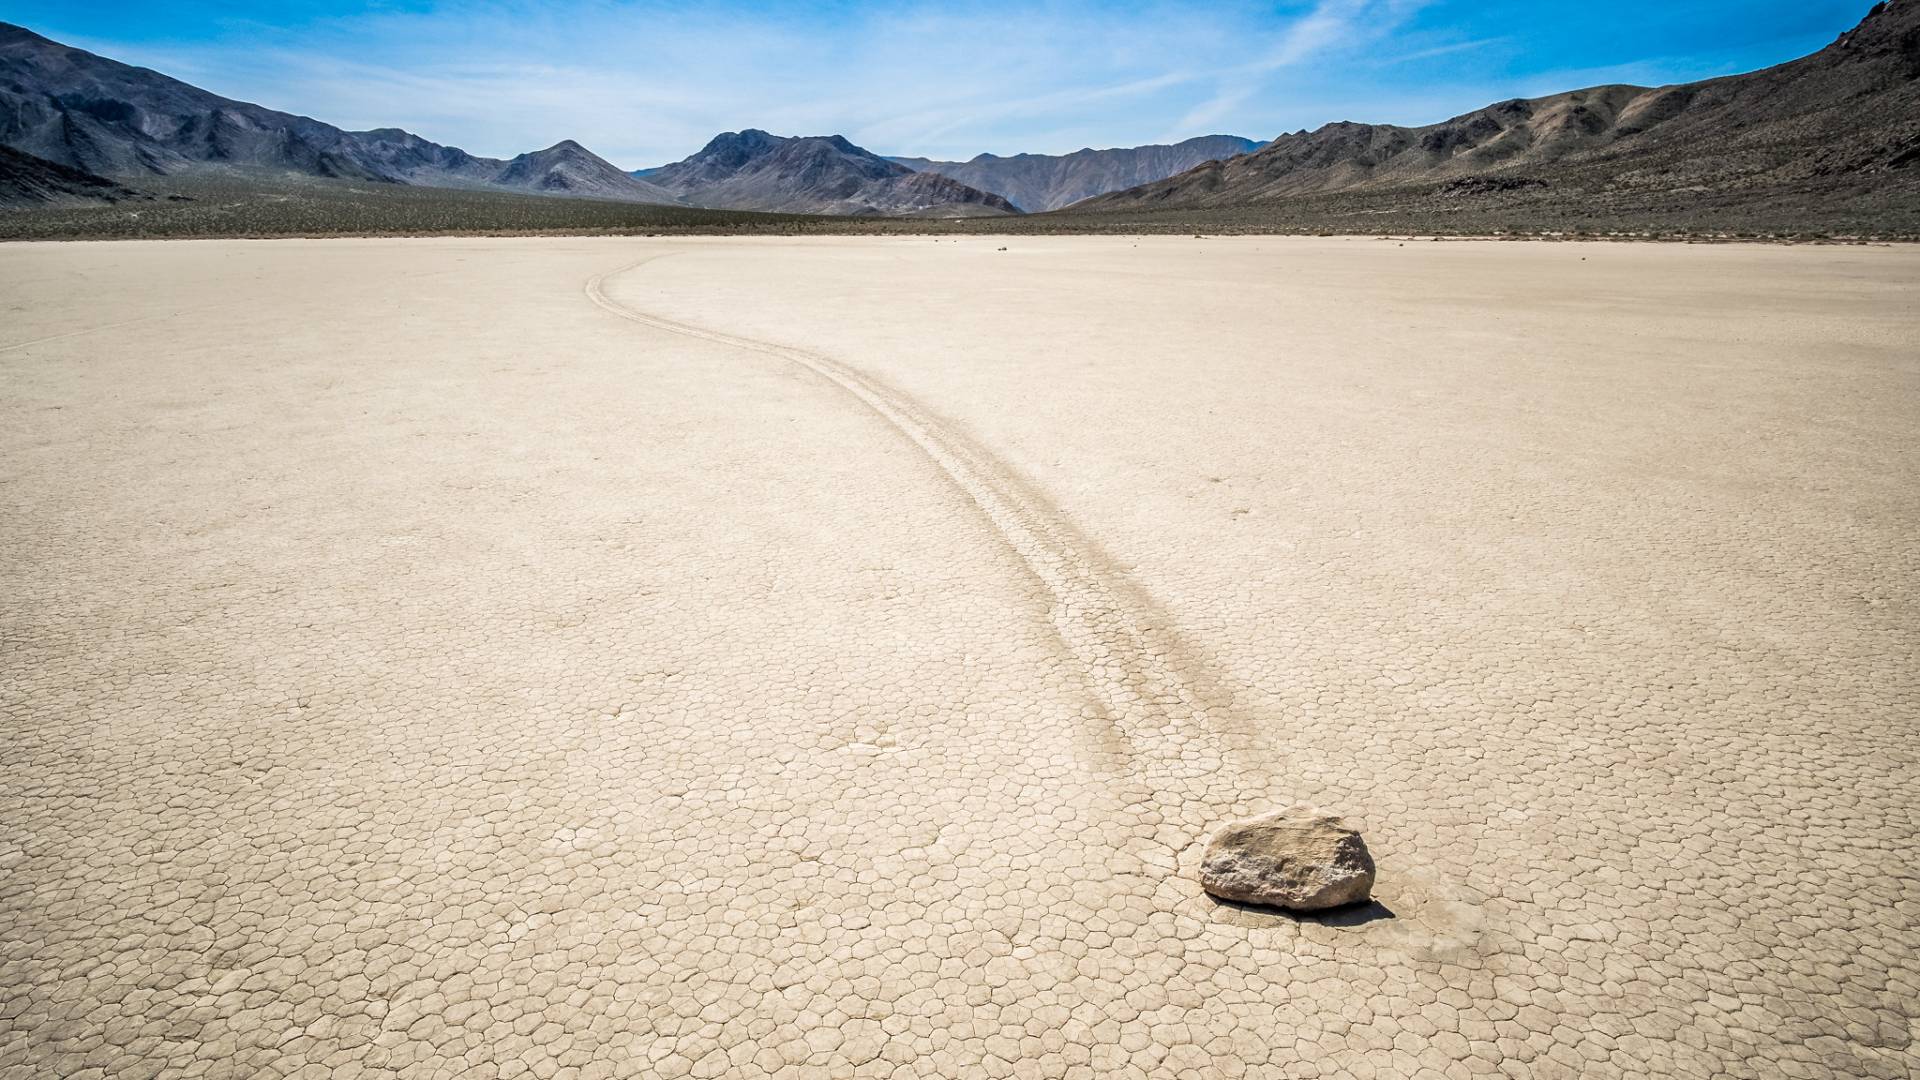 Stone on the Racetrack Playa, Death Valley National Park, California